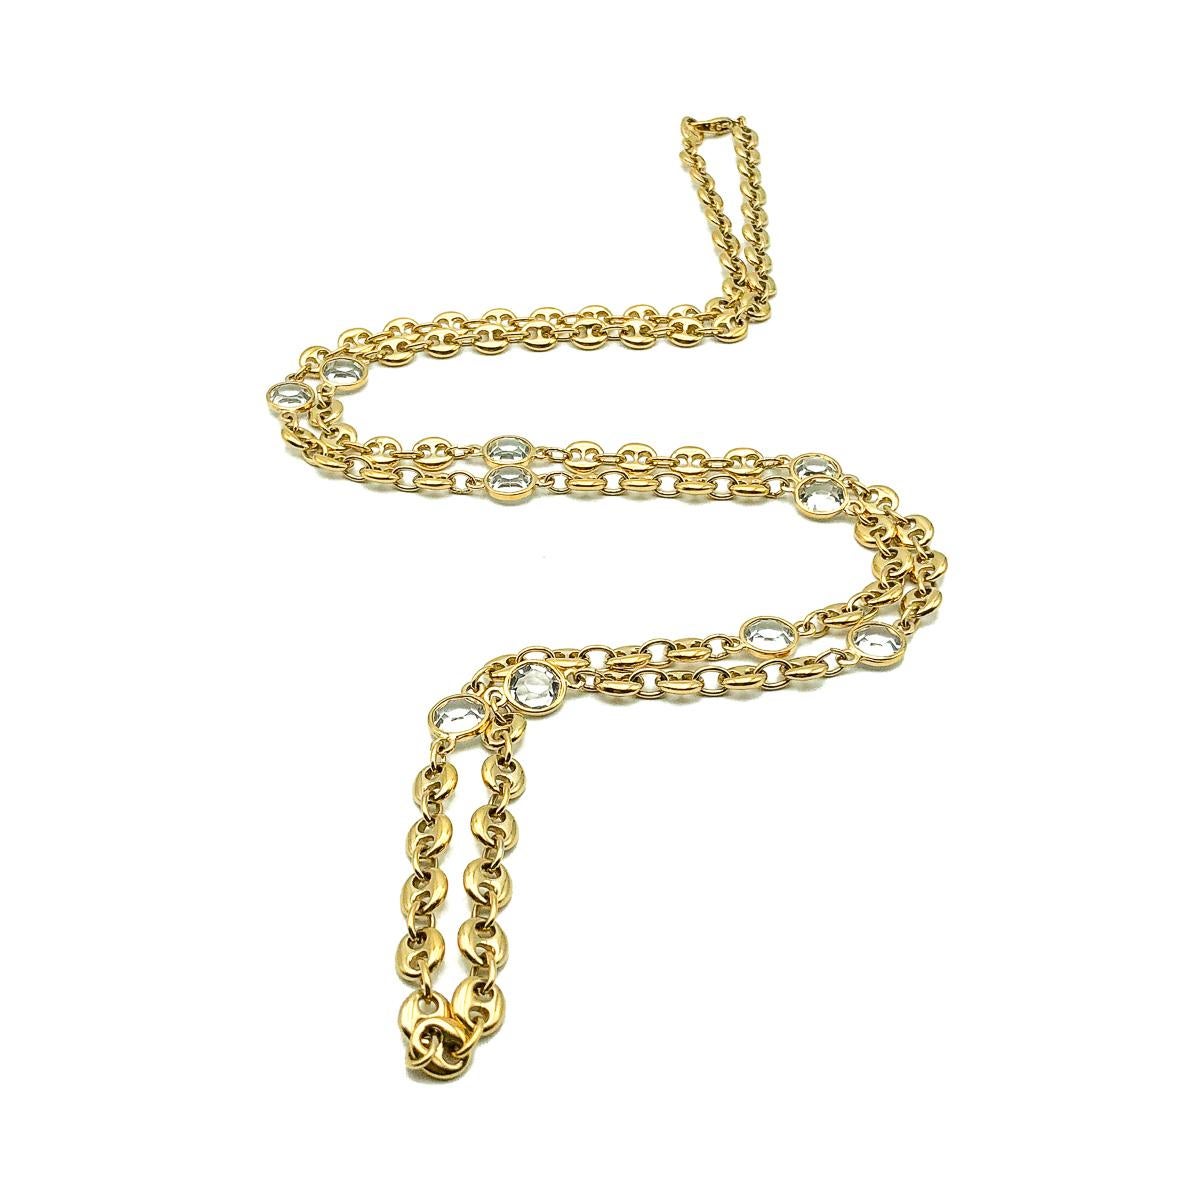 A very long Vintage Crystal Mariner Chain. Featuring mariner link chain interspersed with bezel set crystal stones.  
Vintage Condition: Very good without damage or noteworthy wear. 
Materials: gold plated metal, glass crystal
Signed: unsigned